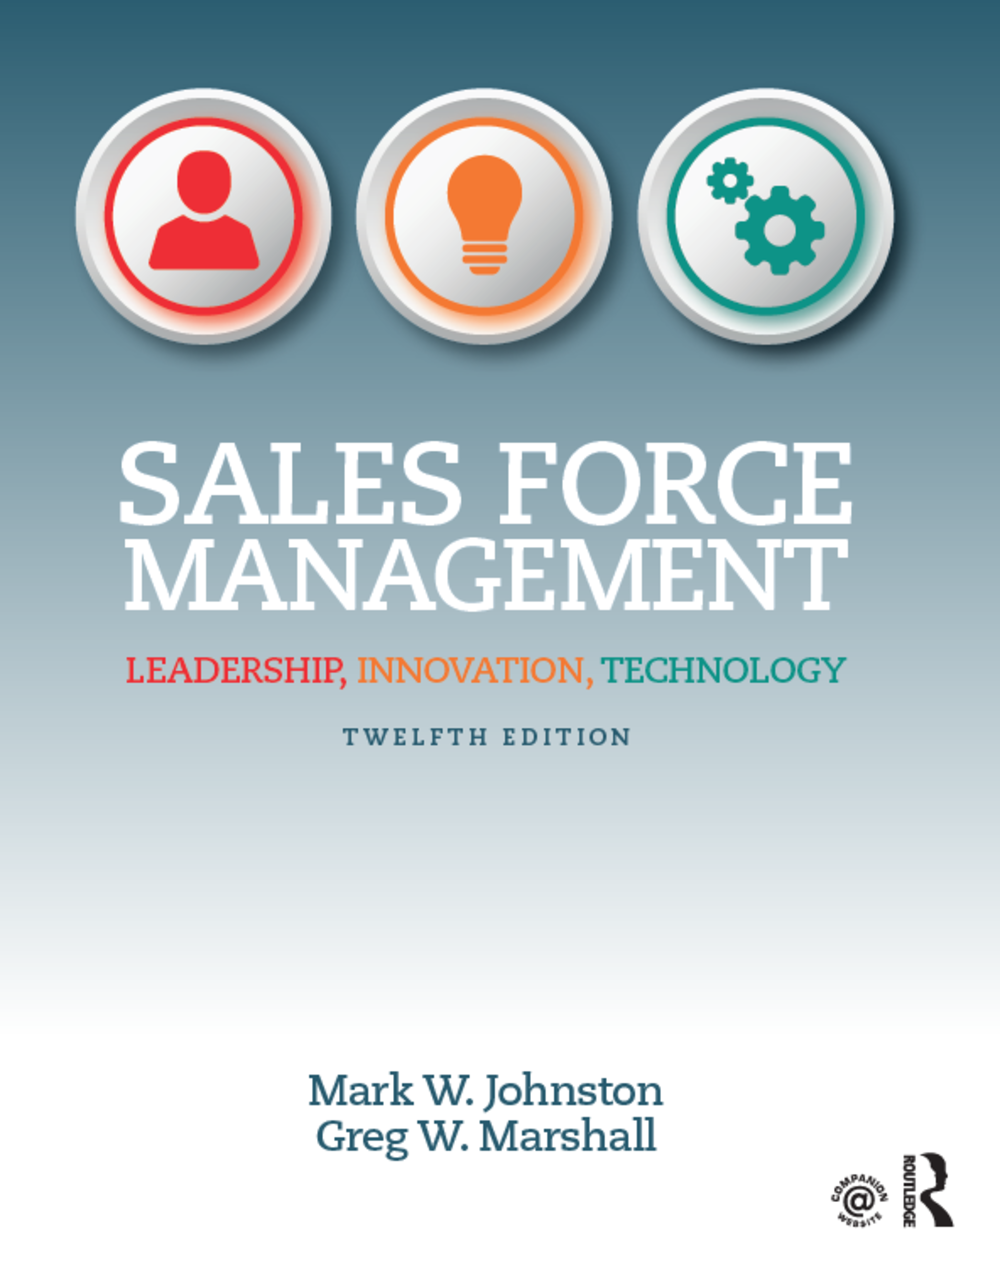 Sales Force Management 12th Edition